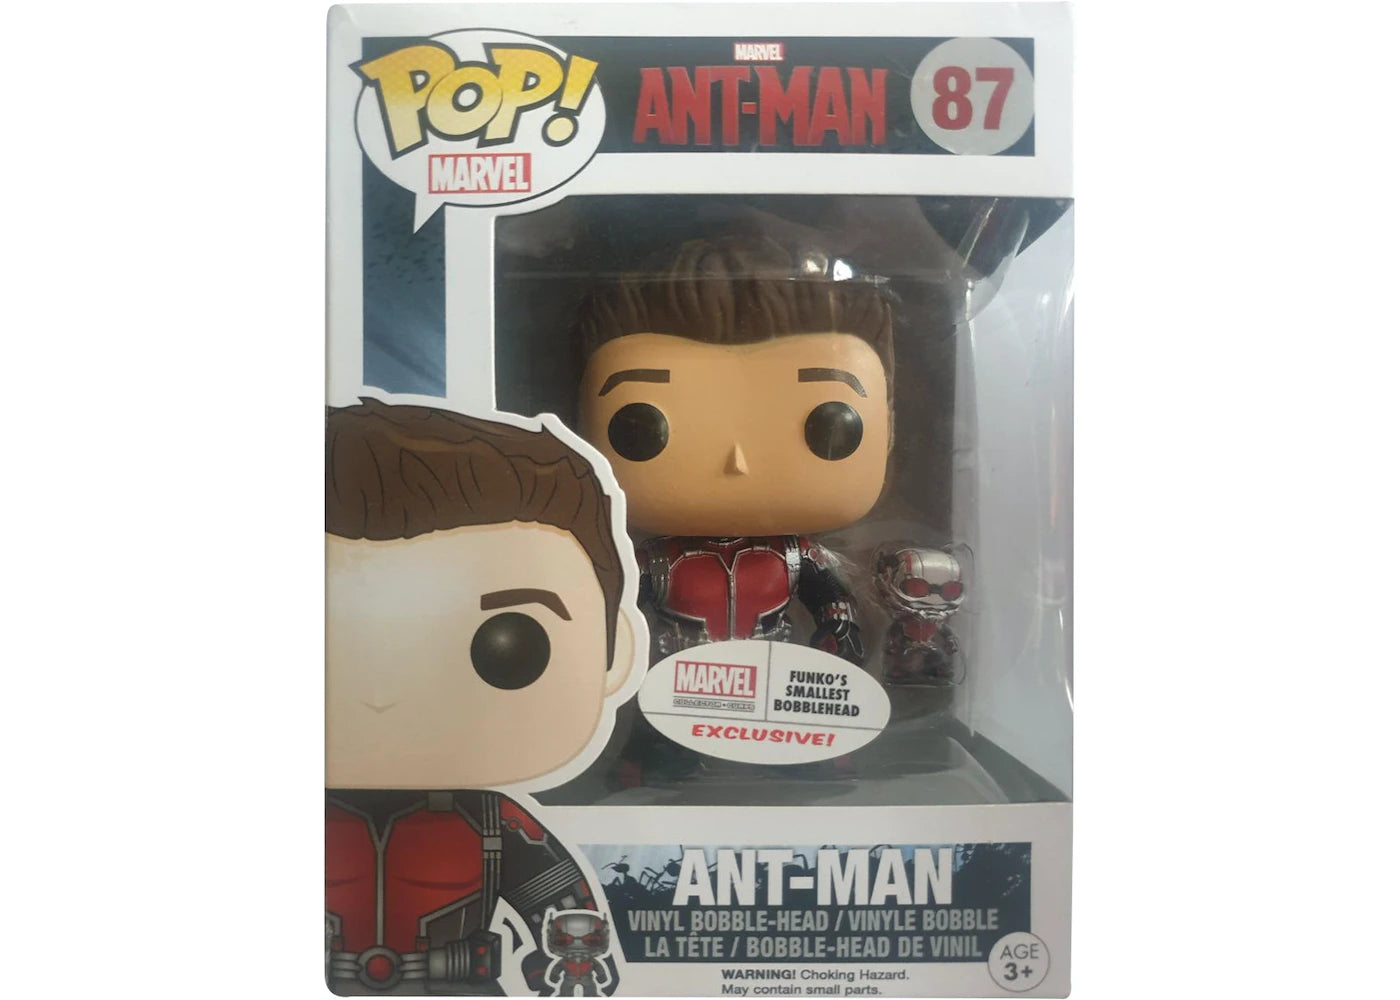 Ant-Man (Collector Corps Exclusive) #87 Ant-Man Pop! Vinyl